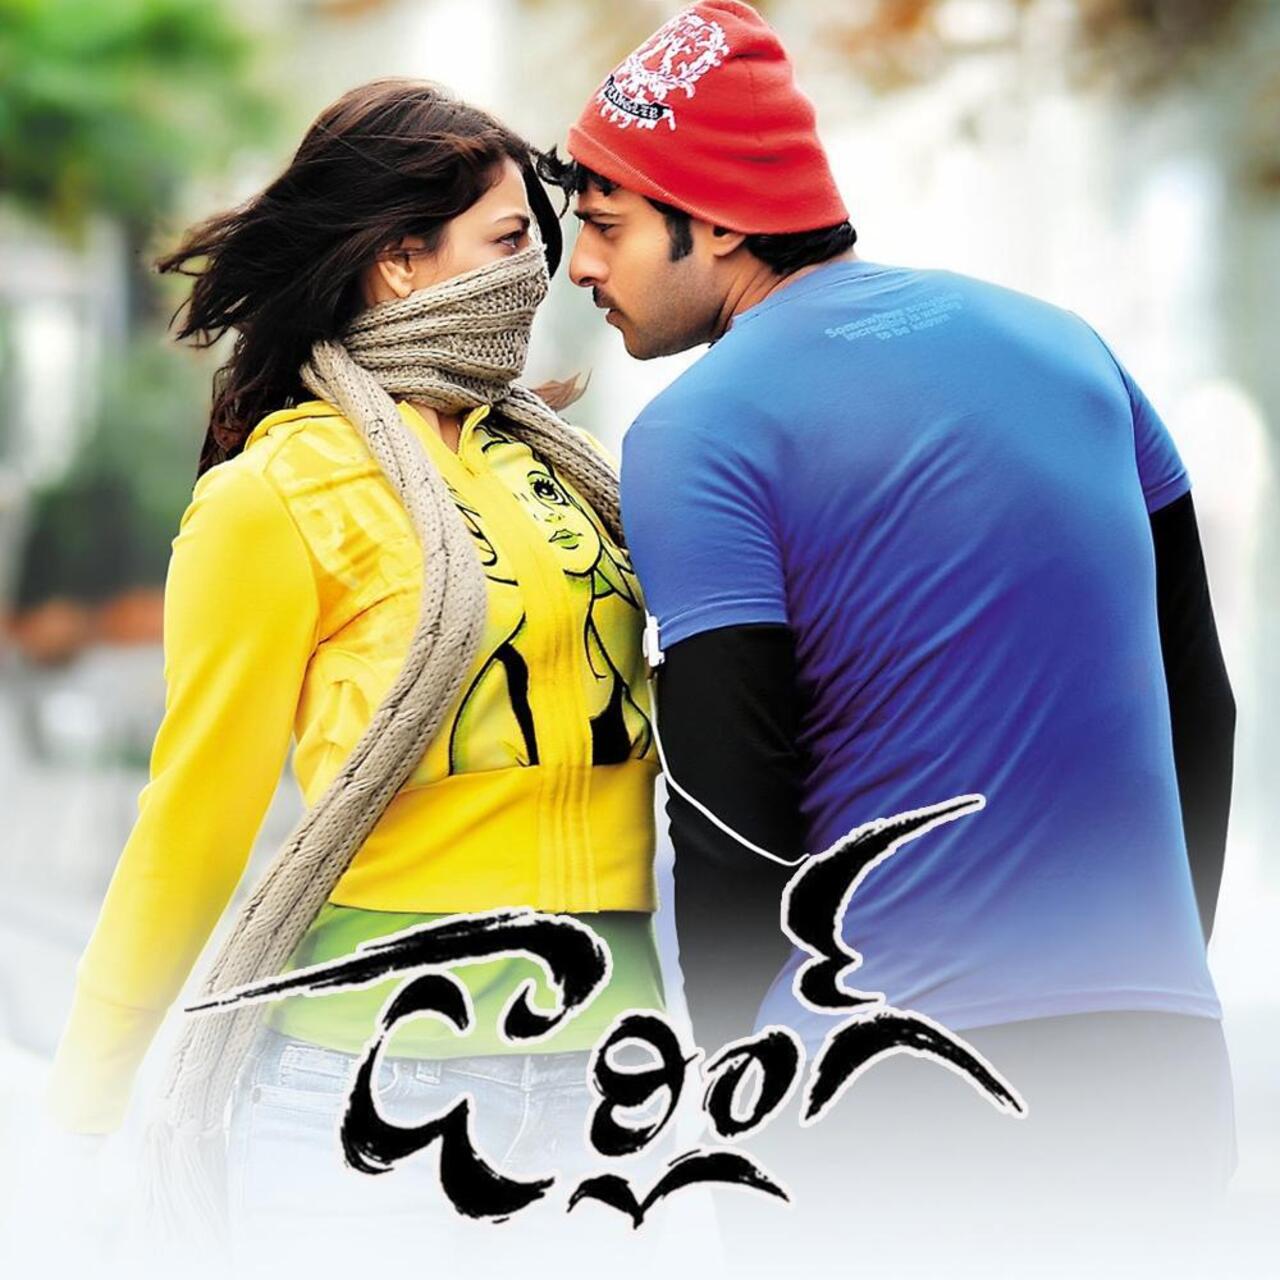 The film was the biggest Telugu blockbuster of 2010. The film made him the Darling of the masses 